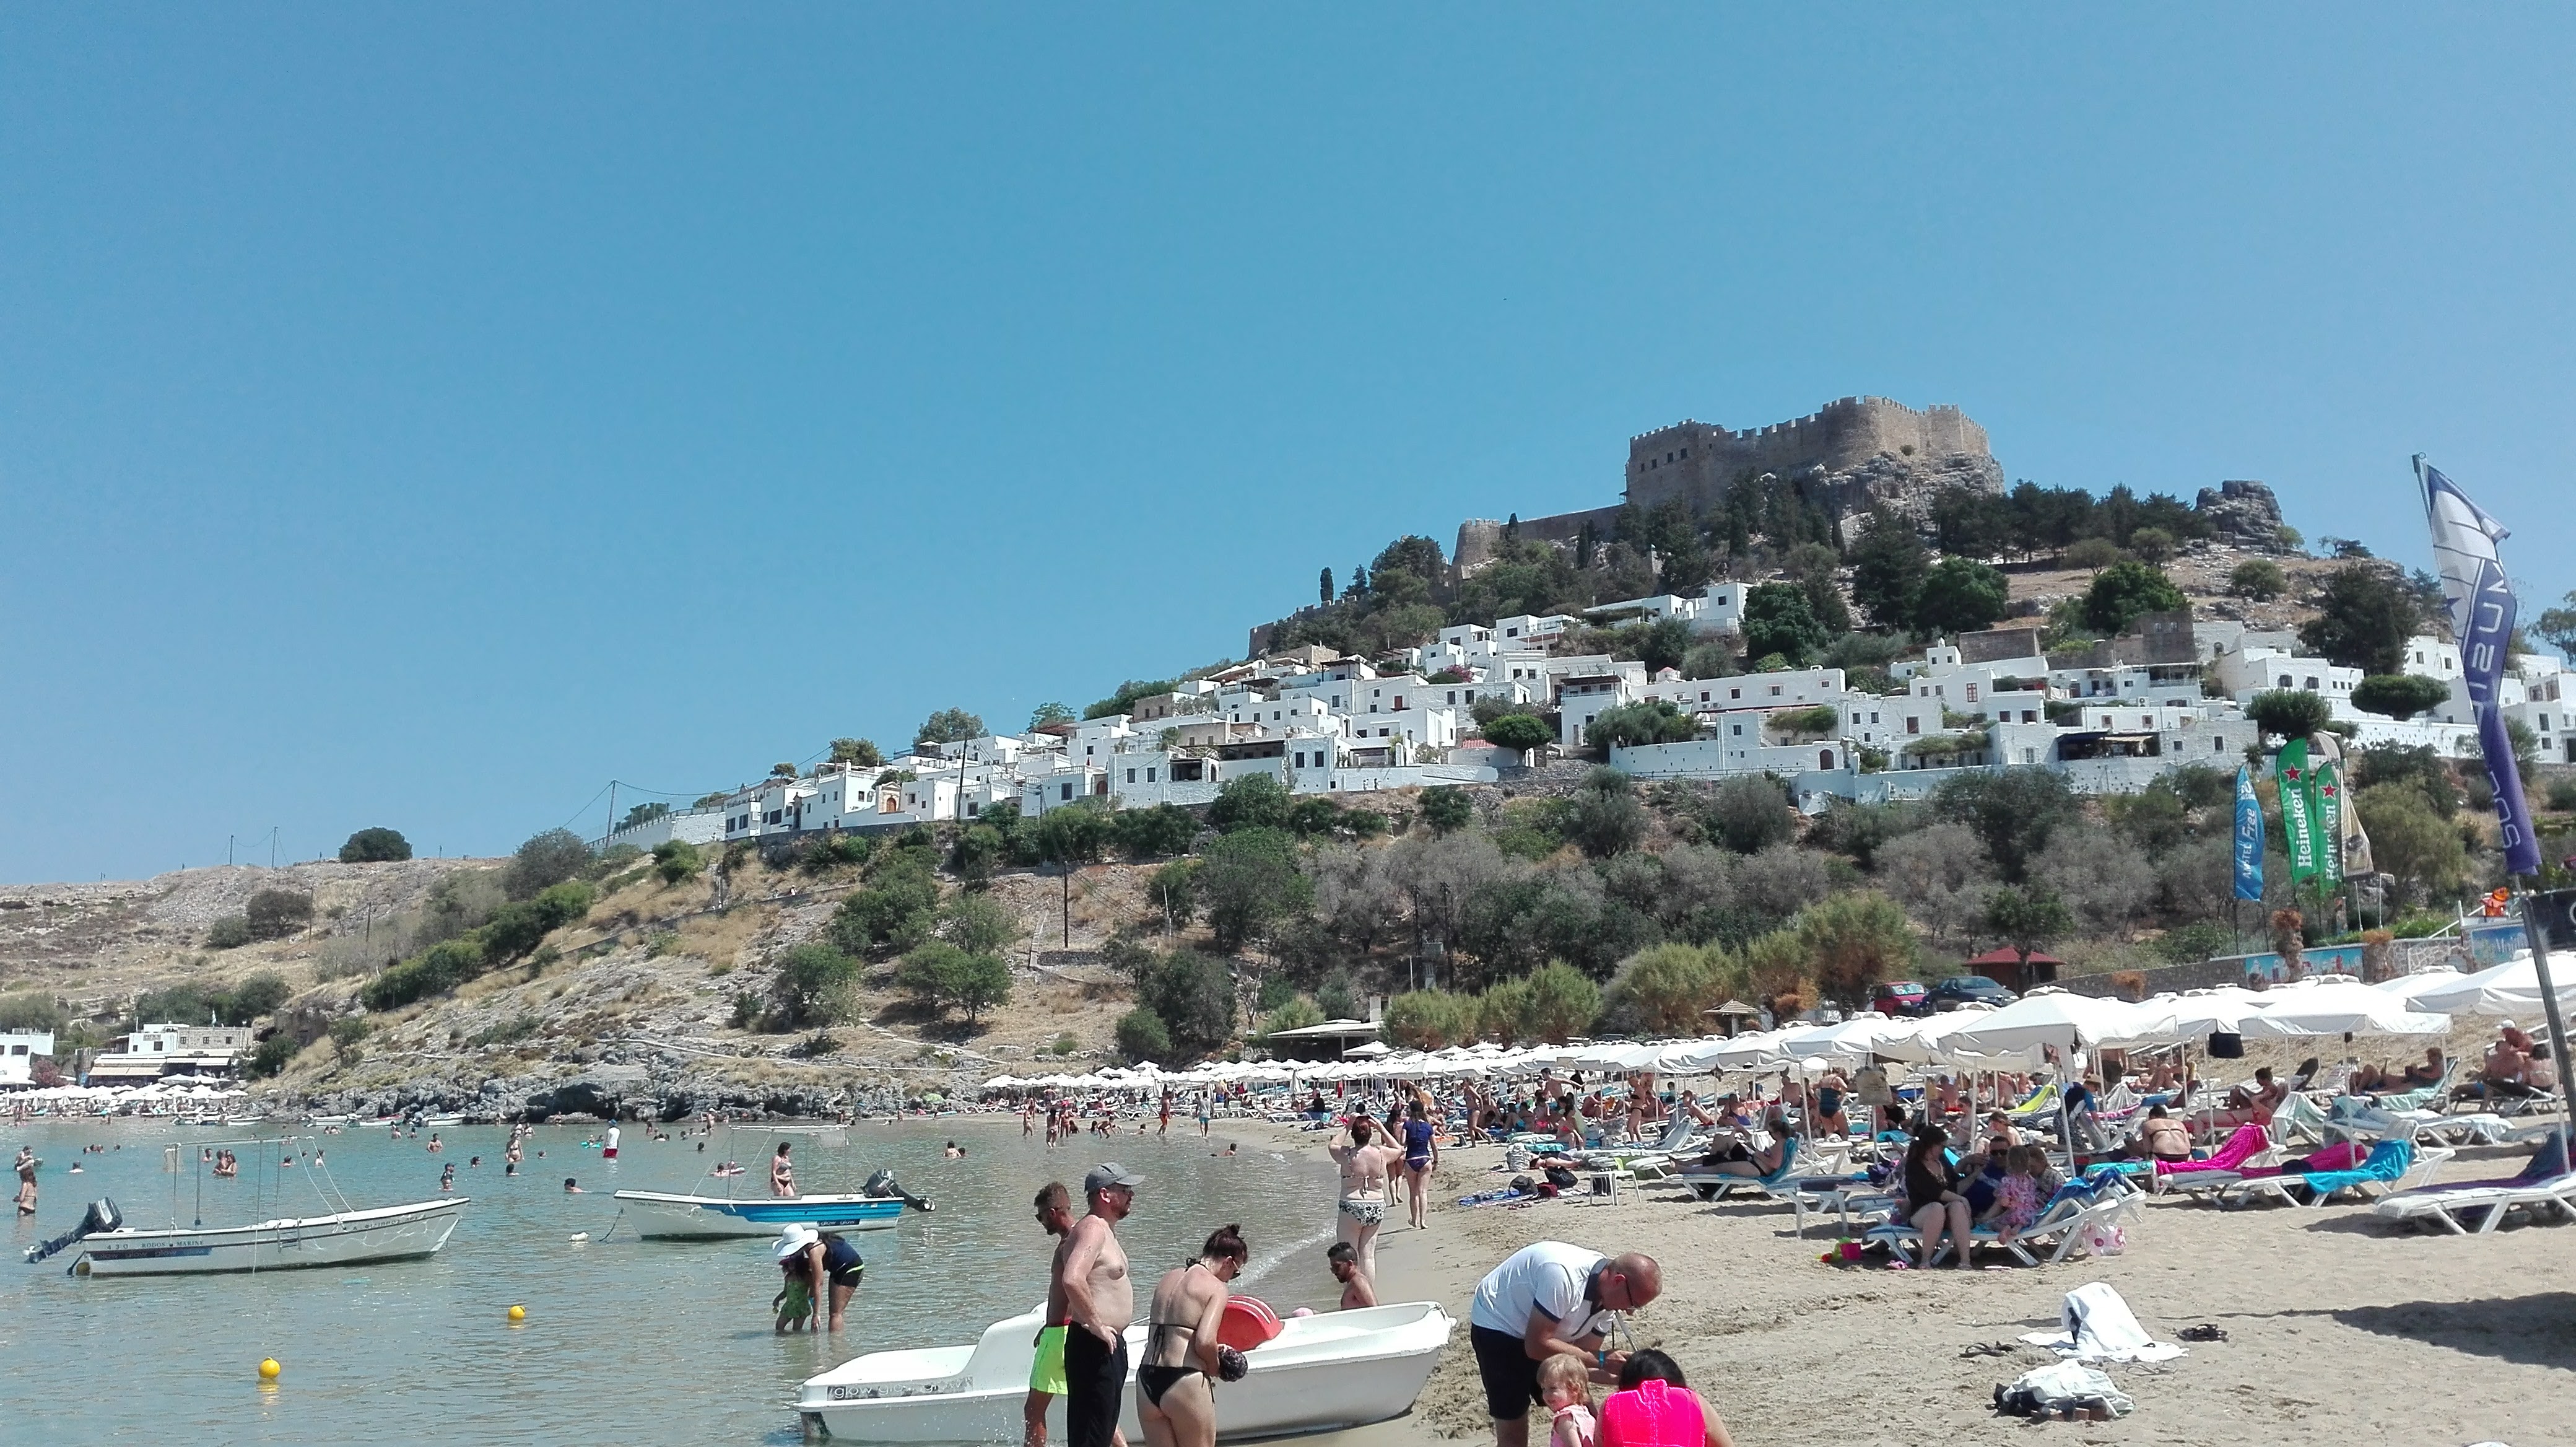 On the beach under the city of Lindos city. As you can see the beach is full of tourists, just as the small city.